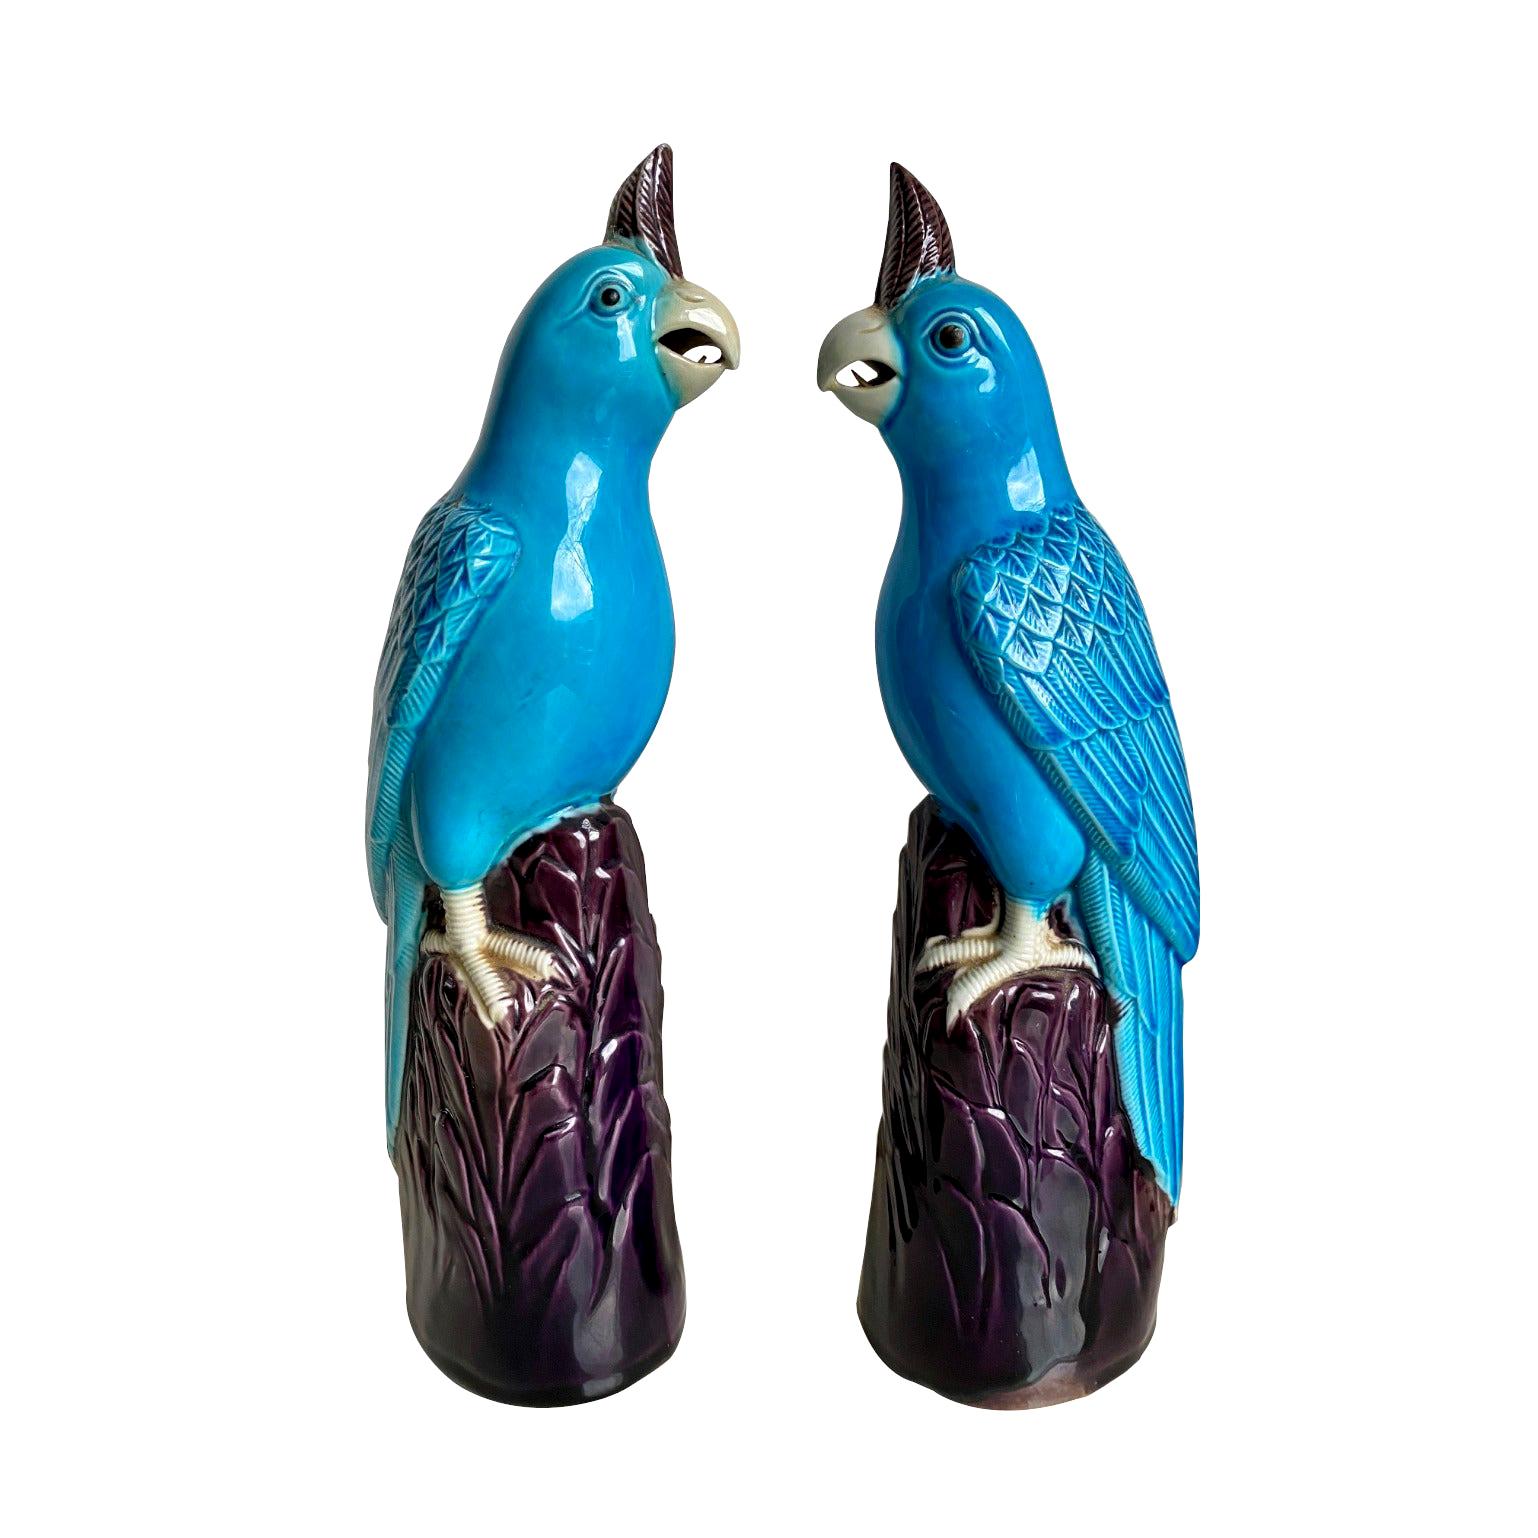 Pair of Late 20th Century Porcelain Turqoise Cockatoos For Sale